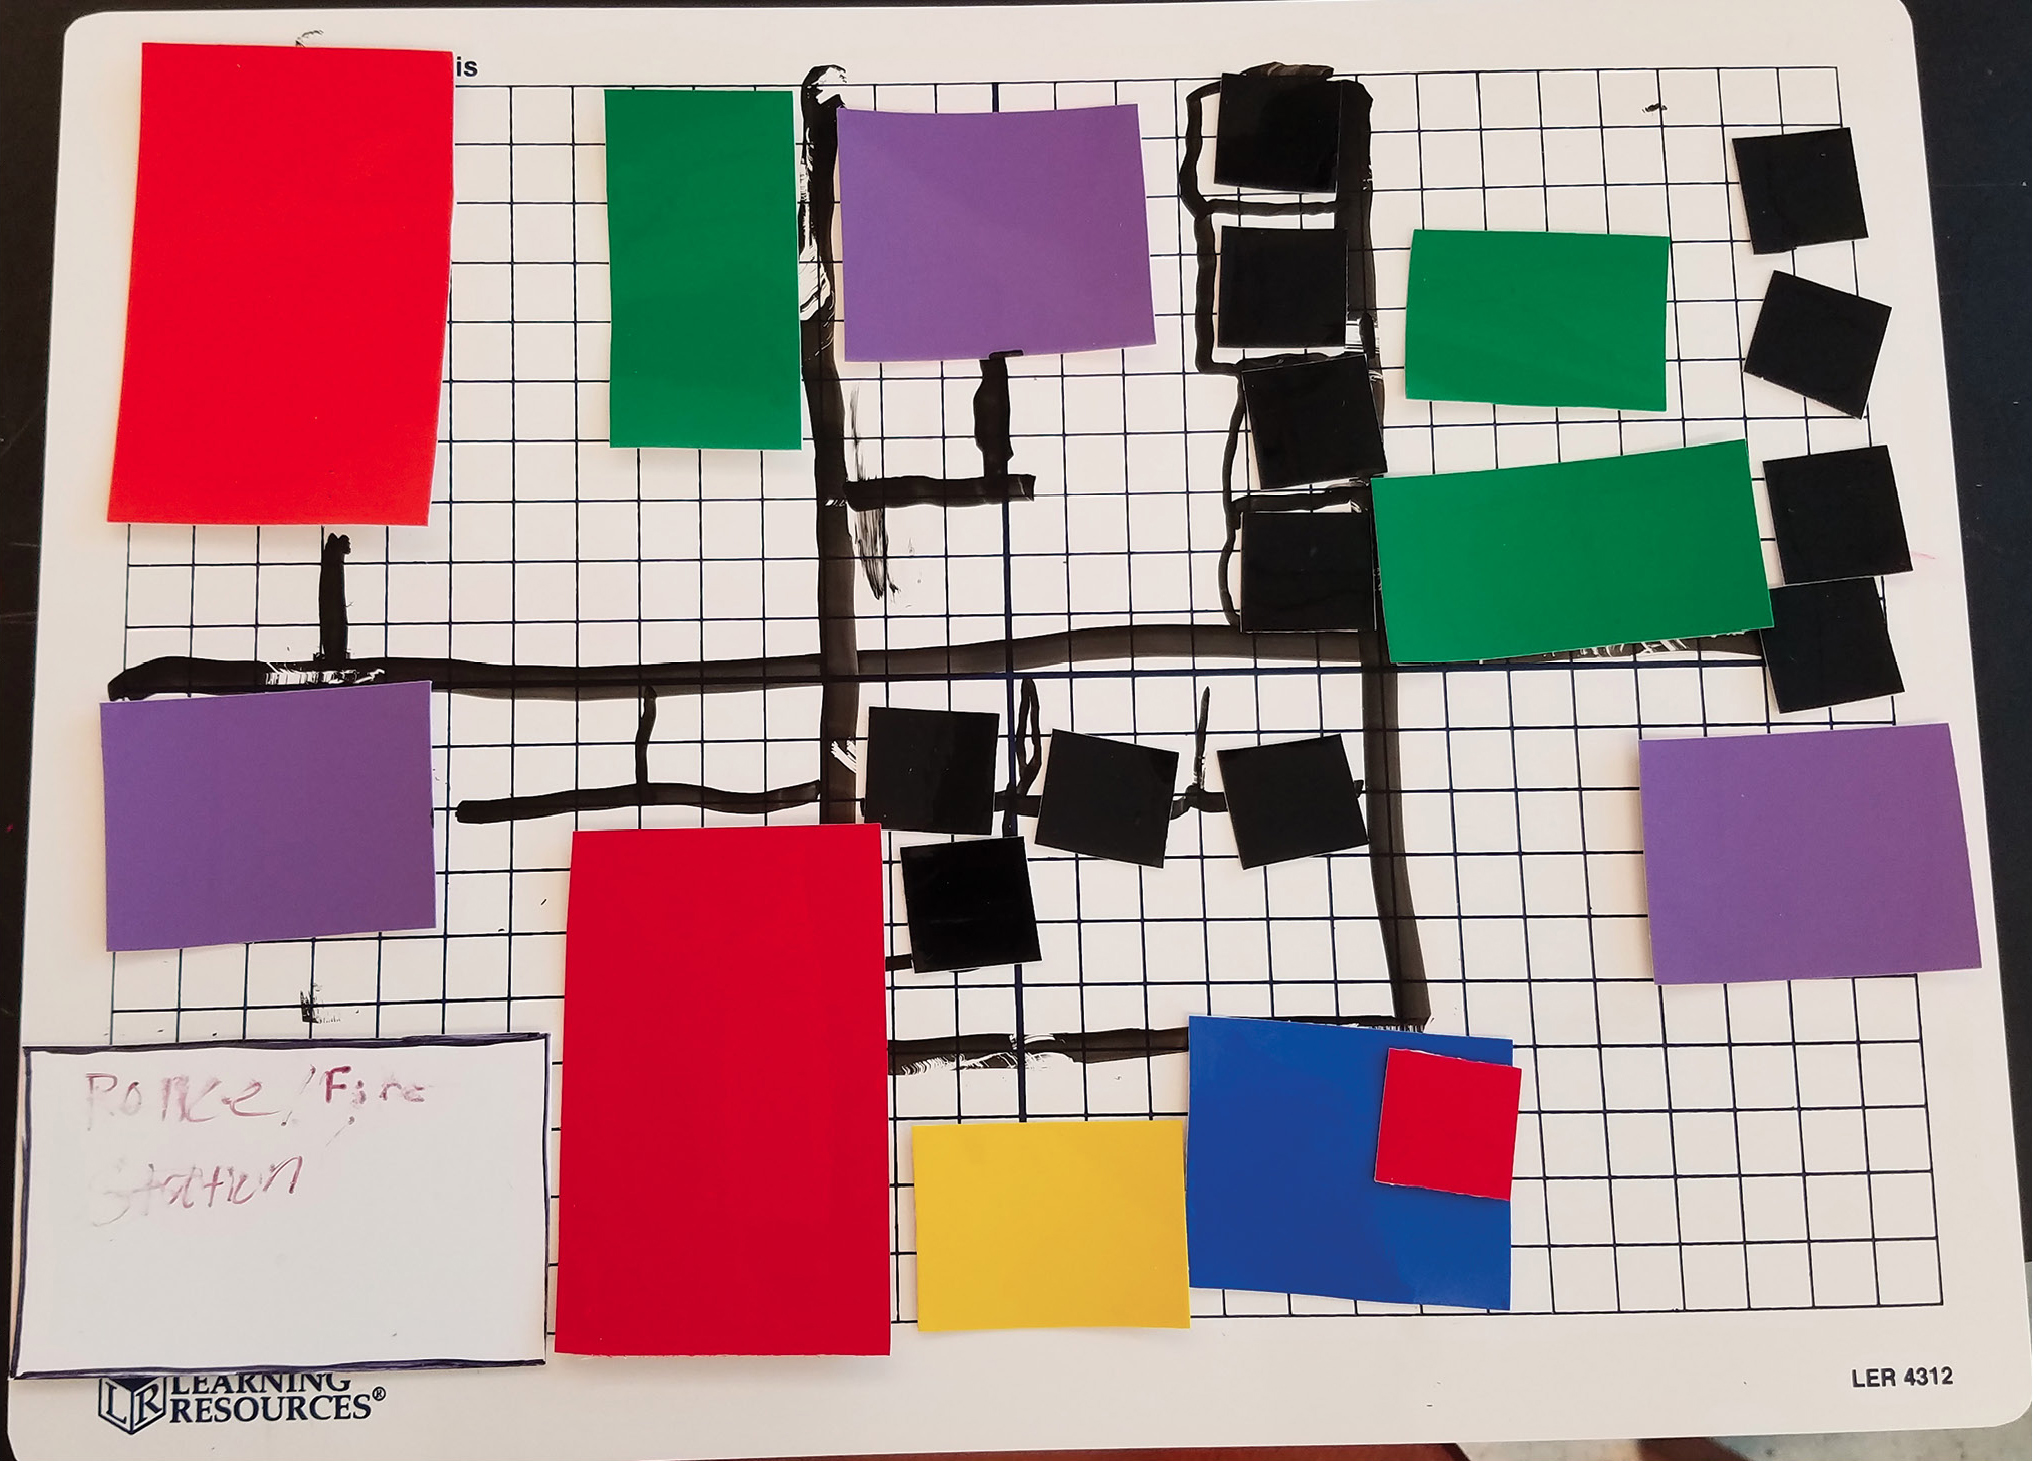 We used dry erase boards and vinyl cling to create reusable and easily revised city blocks.